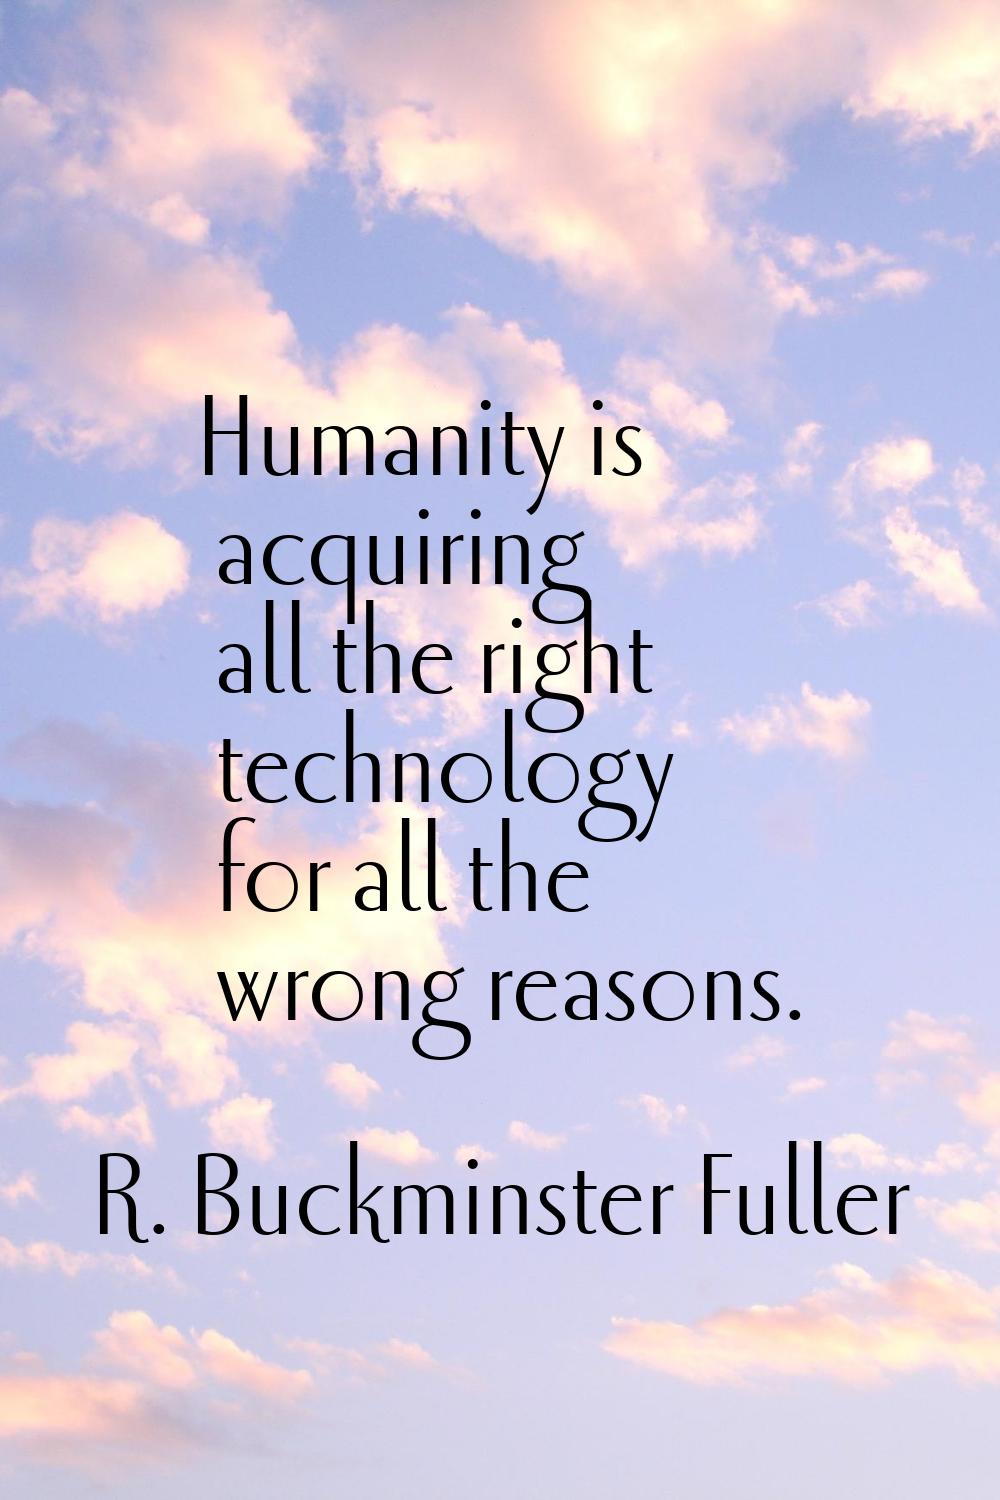 Humanity is acquiring all the right technology for all the wrong reasons.